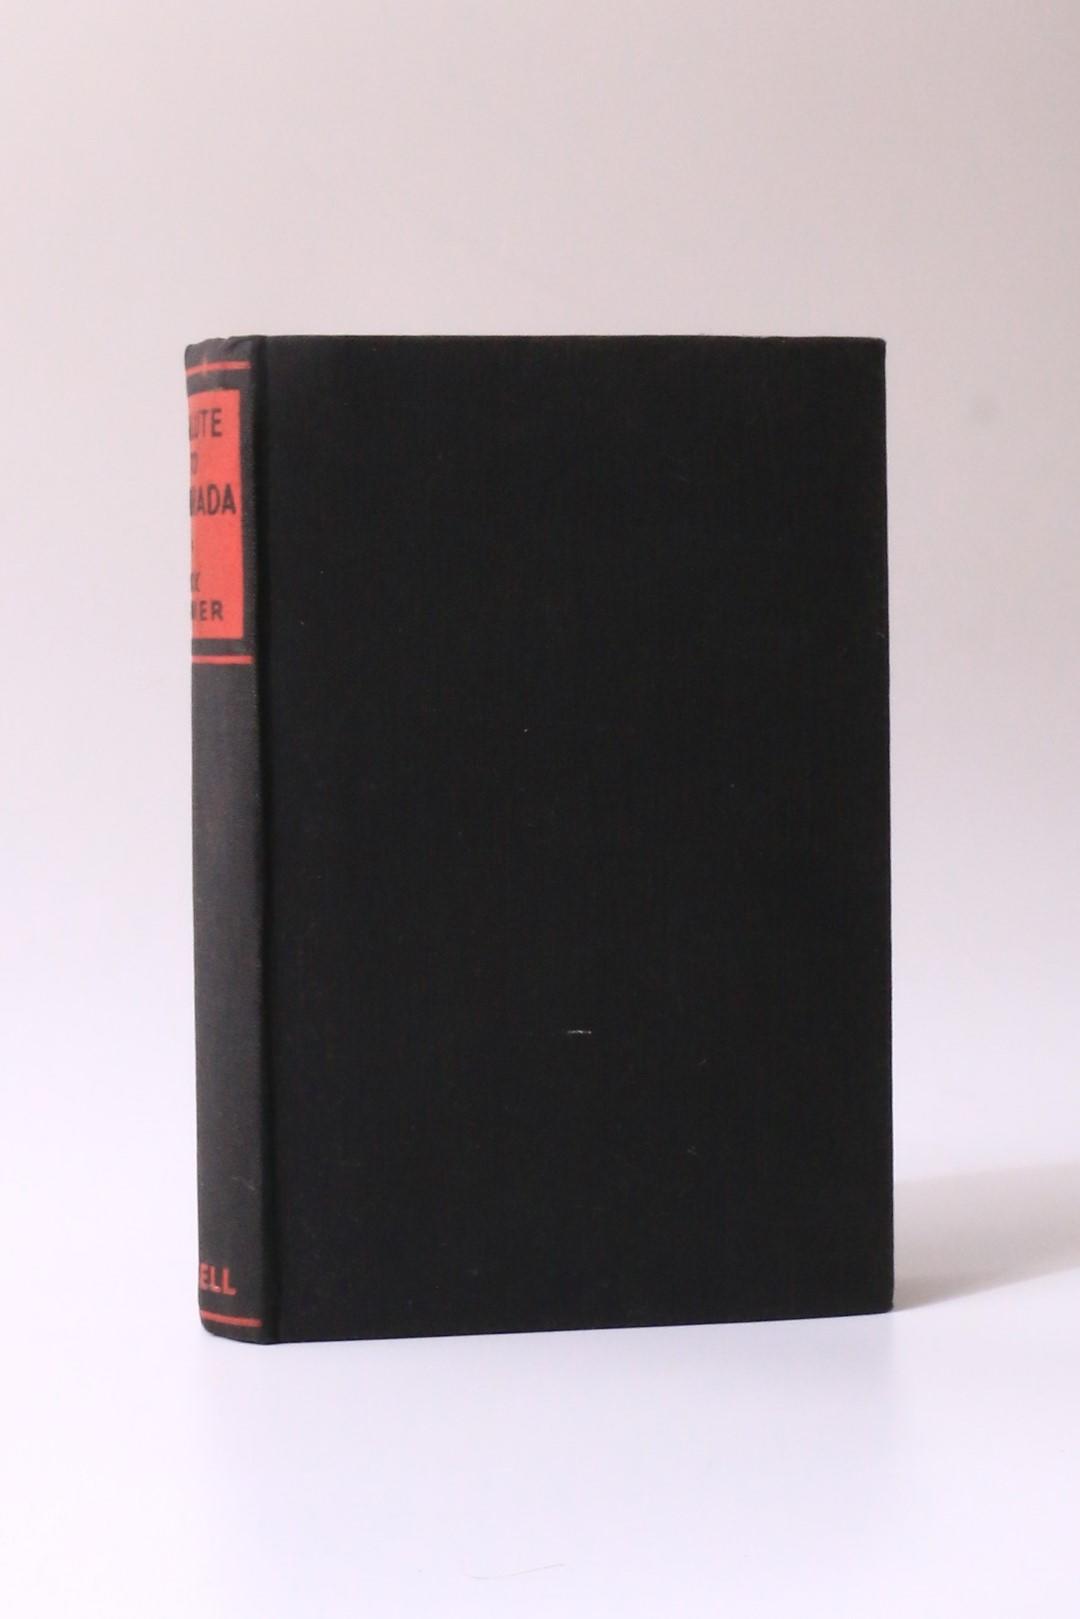 Sax Rohmer - Salute to Bazarada - Cassell, 1939, First Edition.